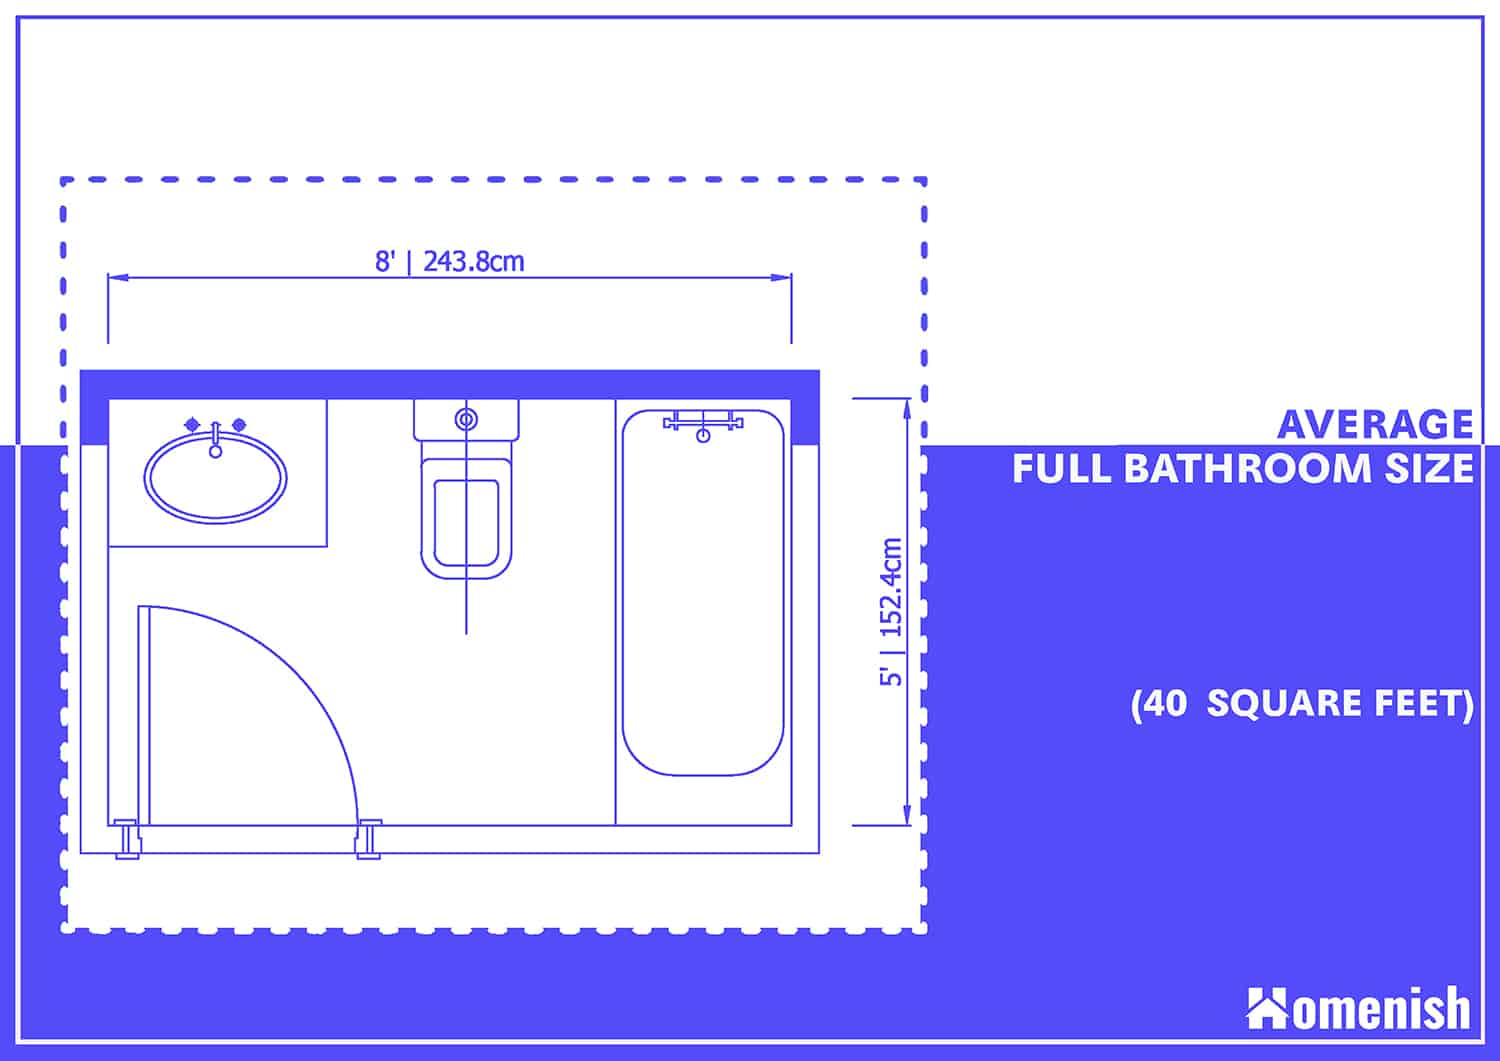 What Is The Average Size Of Bathroom Homenish - How Many Square Feet Is A Typical Bathroom